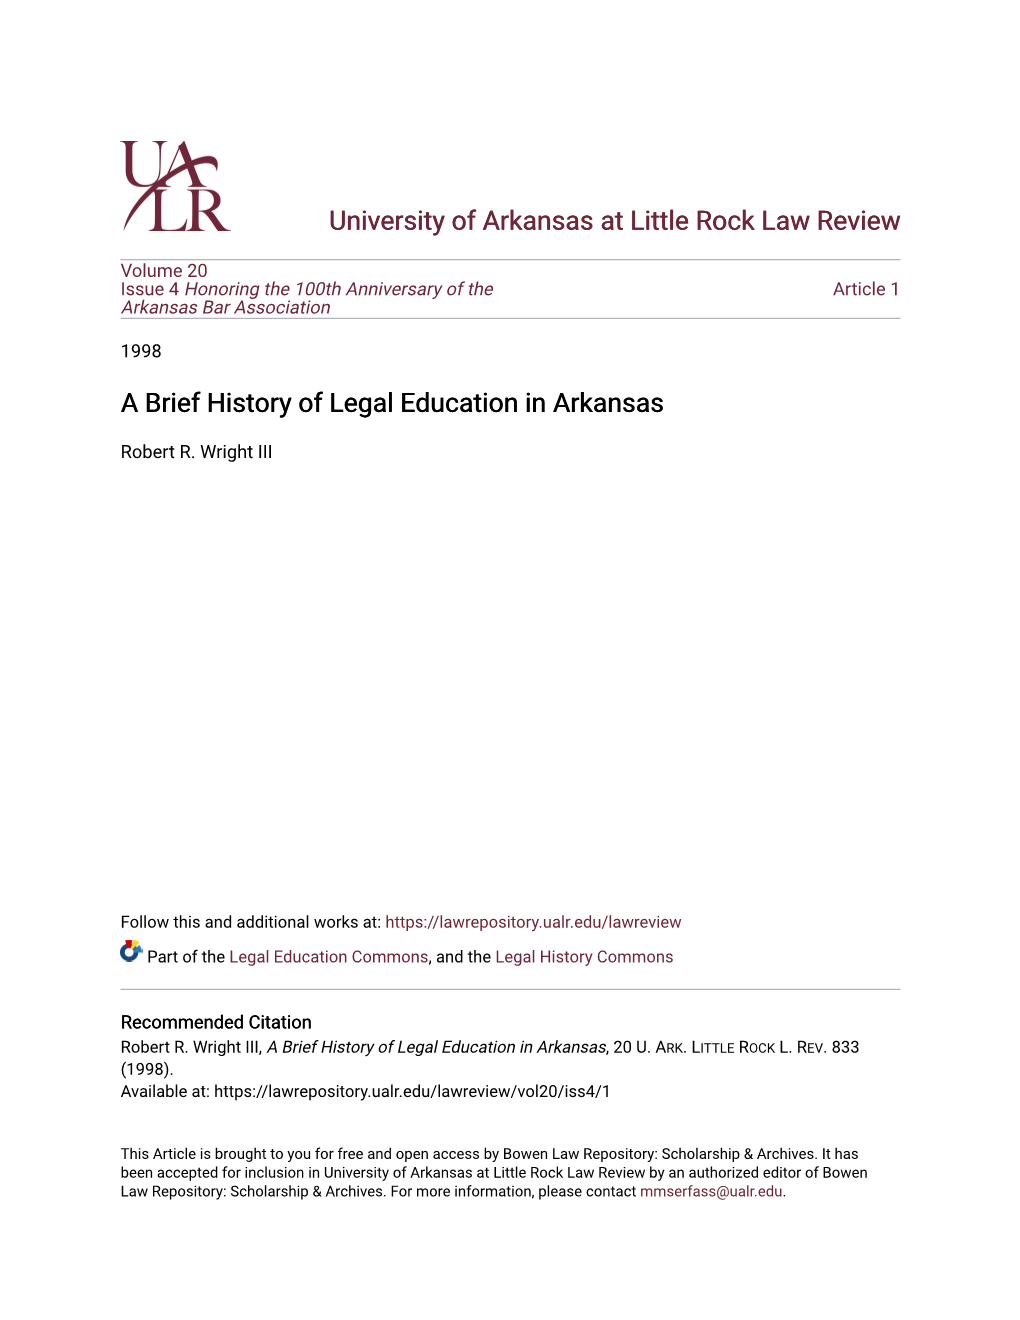 A Brief History of Legal Education in Arkansas